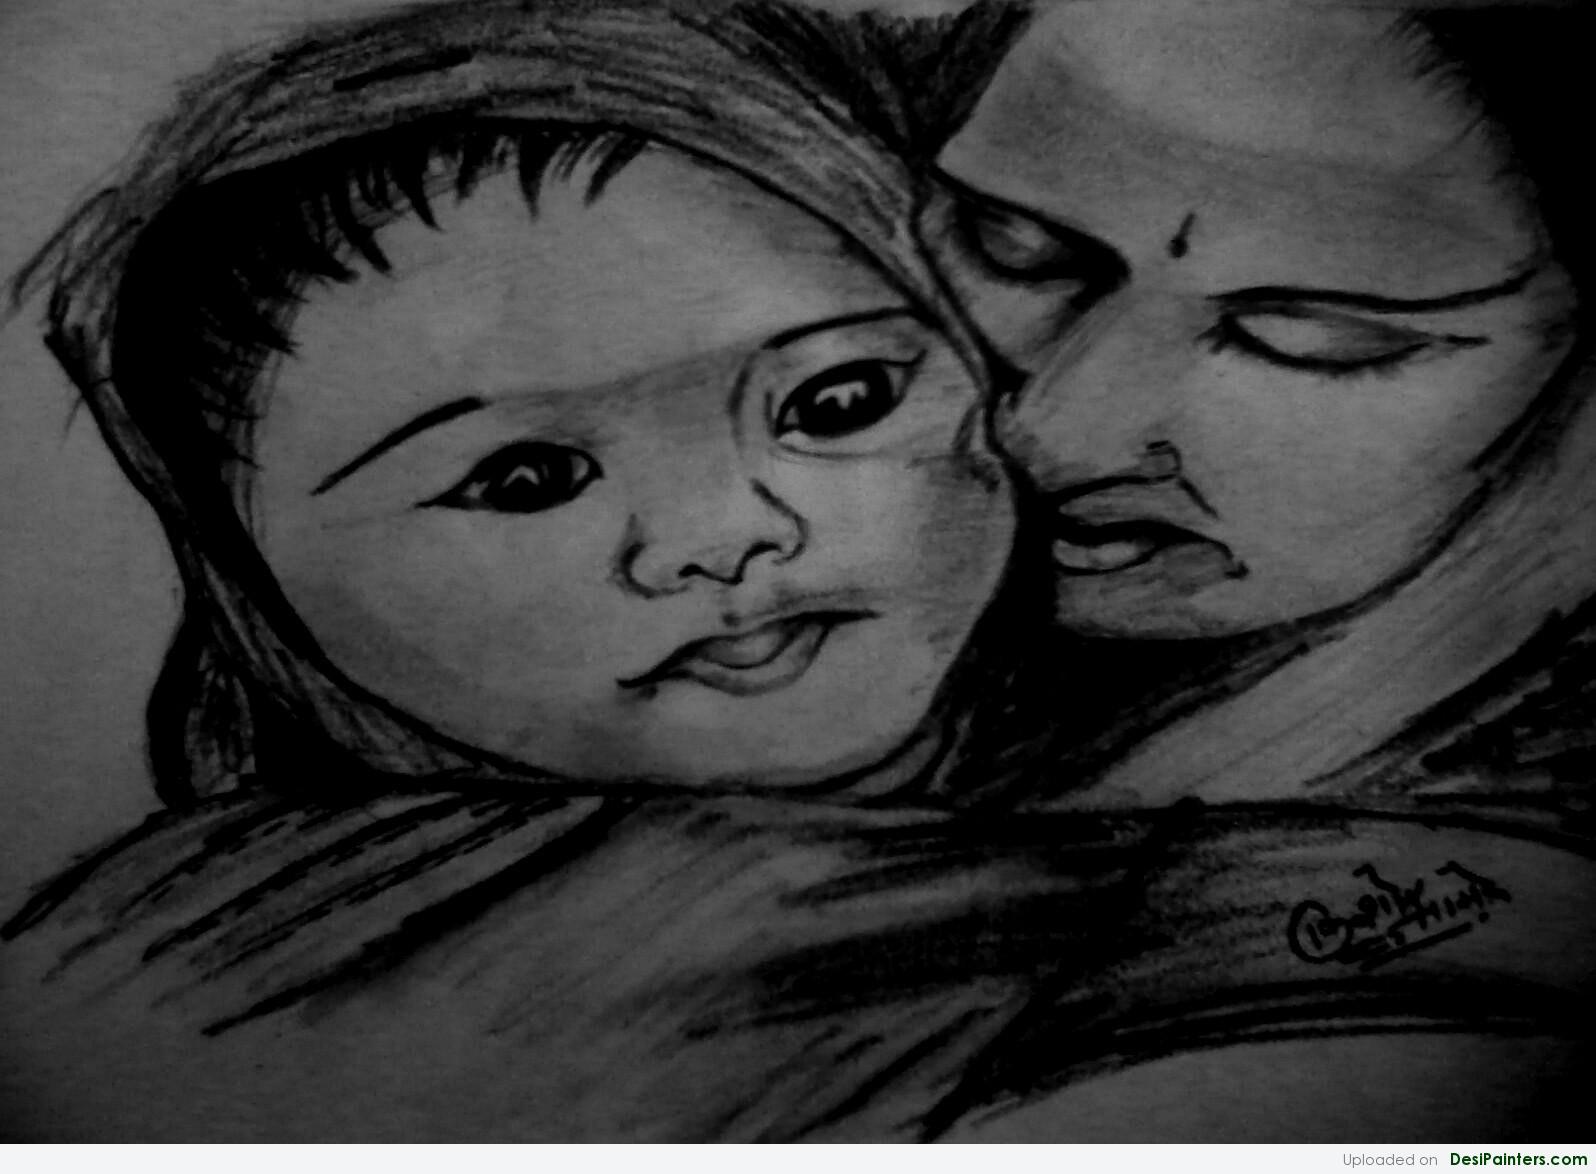 Charcoal Sketch Of A Mother With Baby | DesiPainters.com